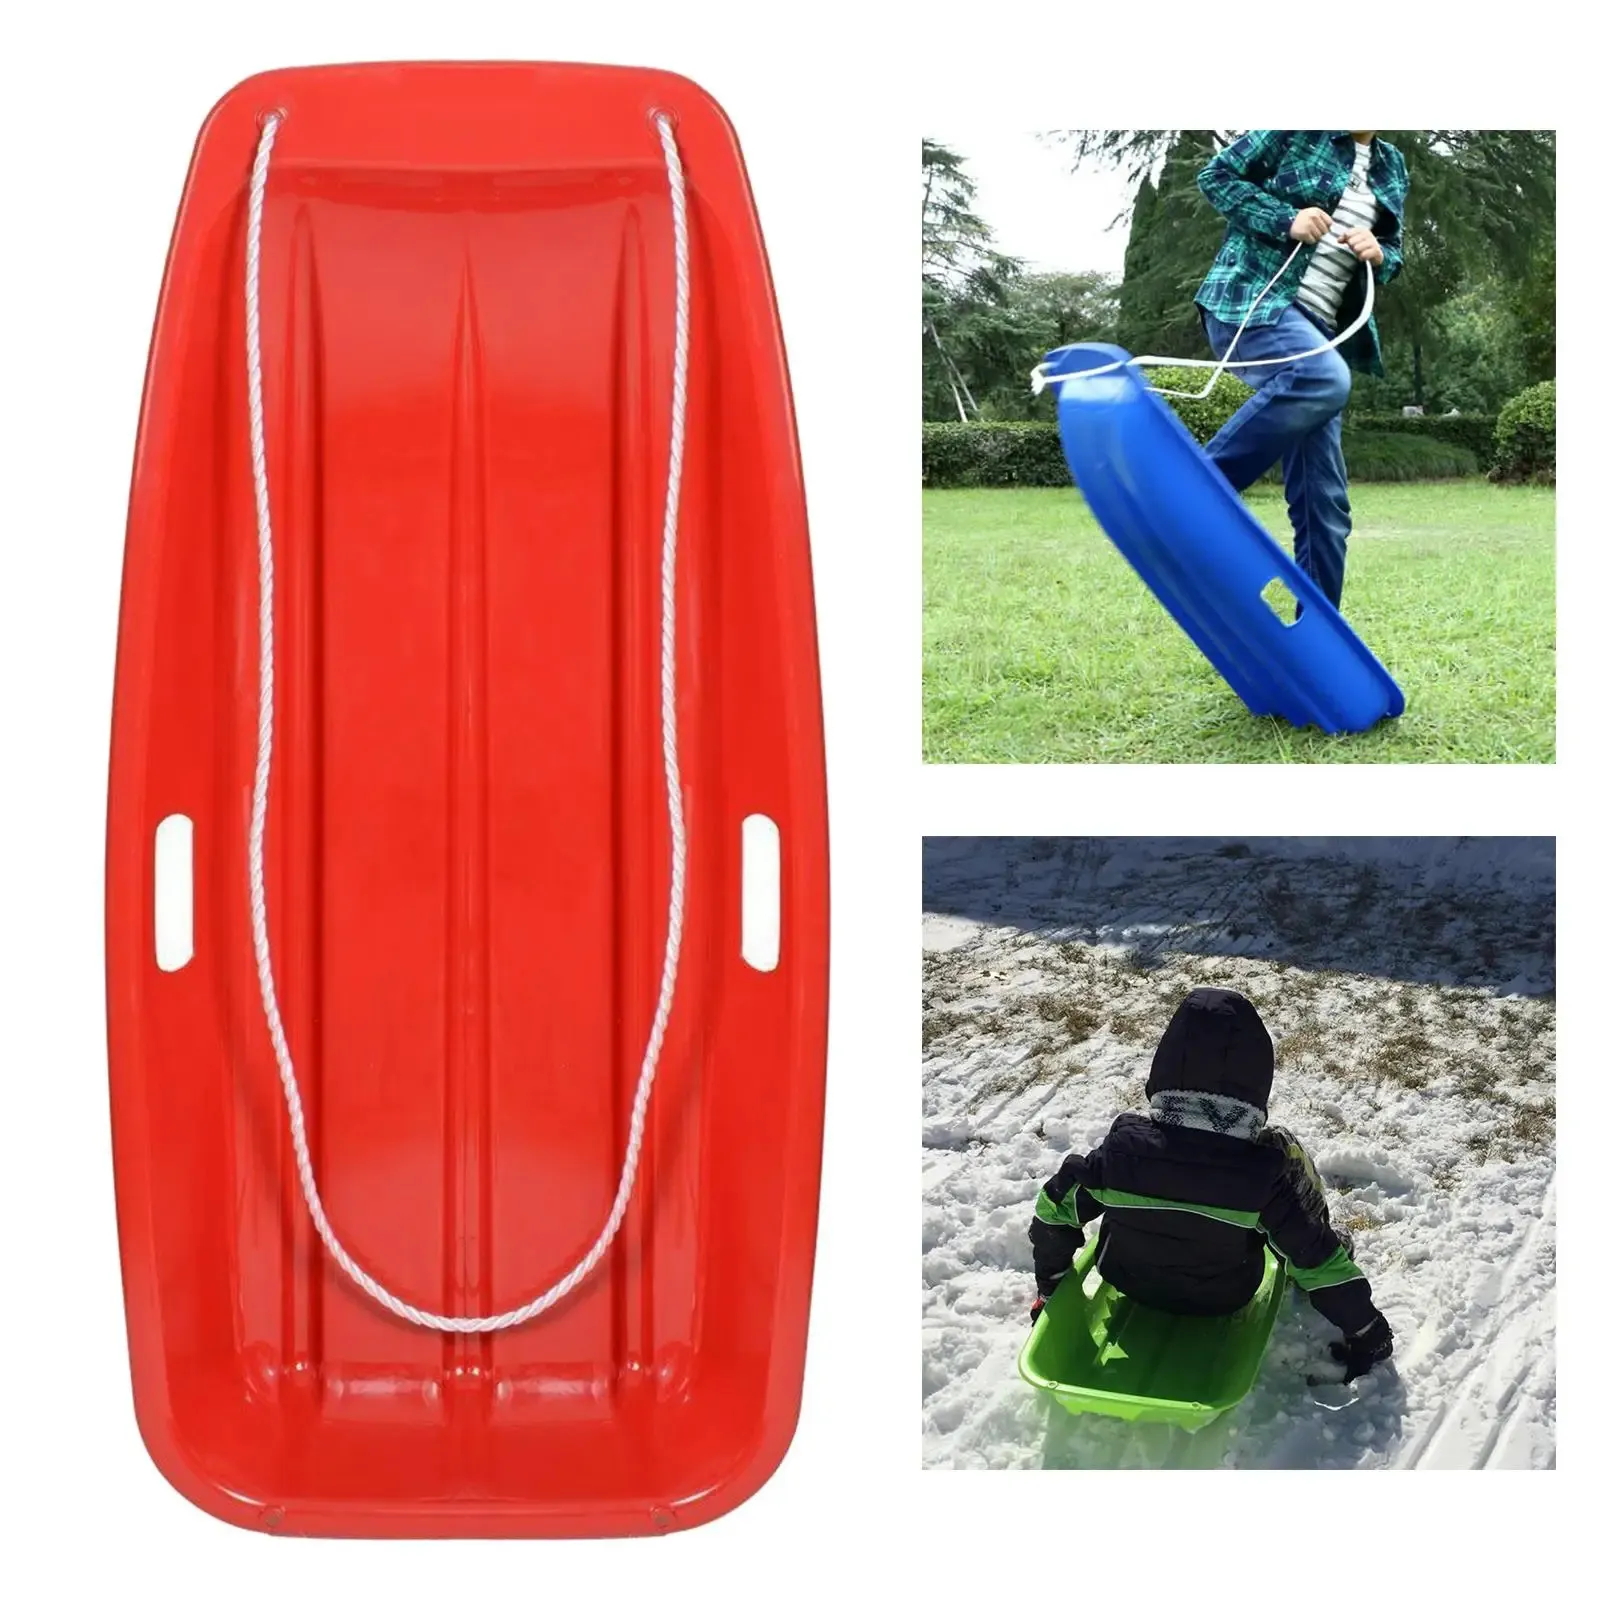 Snow Sled Outdoor Luge Grass Skiing Board Downhill Skating Toboggan Slider with Pull Rope for Kids Adults